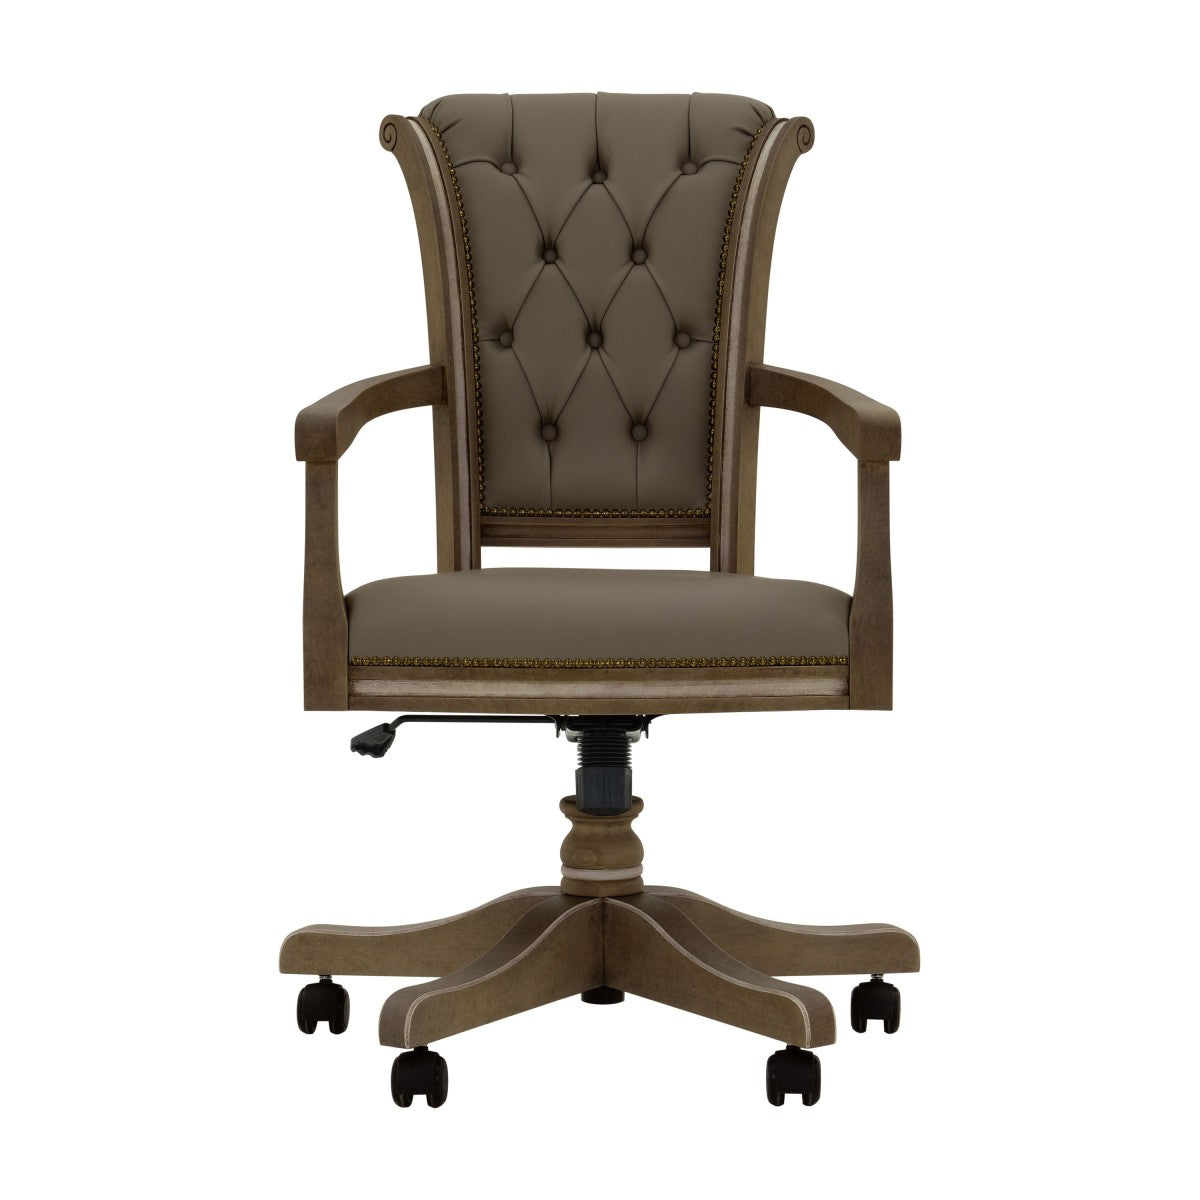 Paris Bespoke Upholstered Luxury Executive Swivel Office Desk Chair MS699A Custom Made To Order